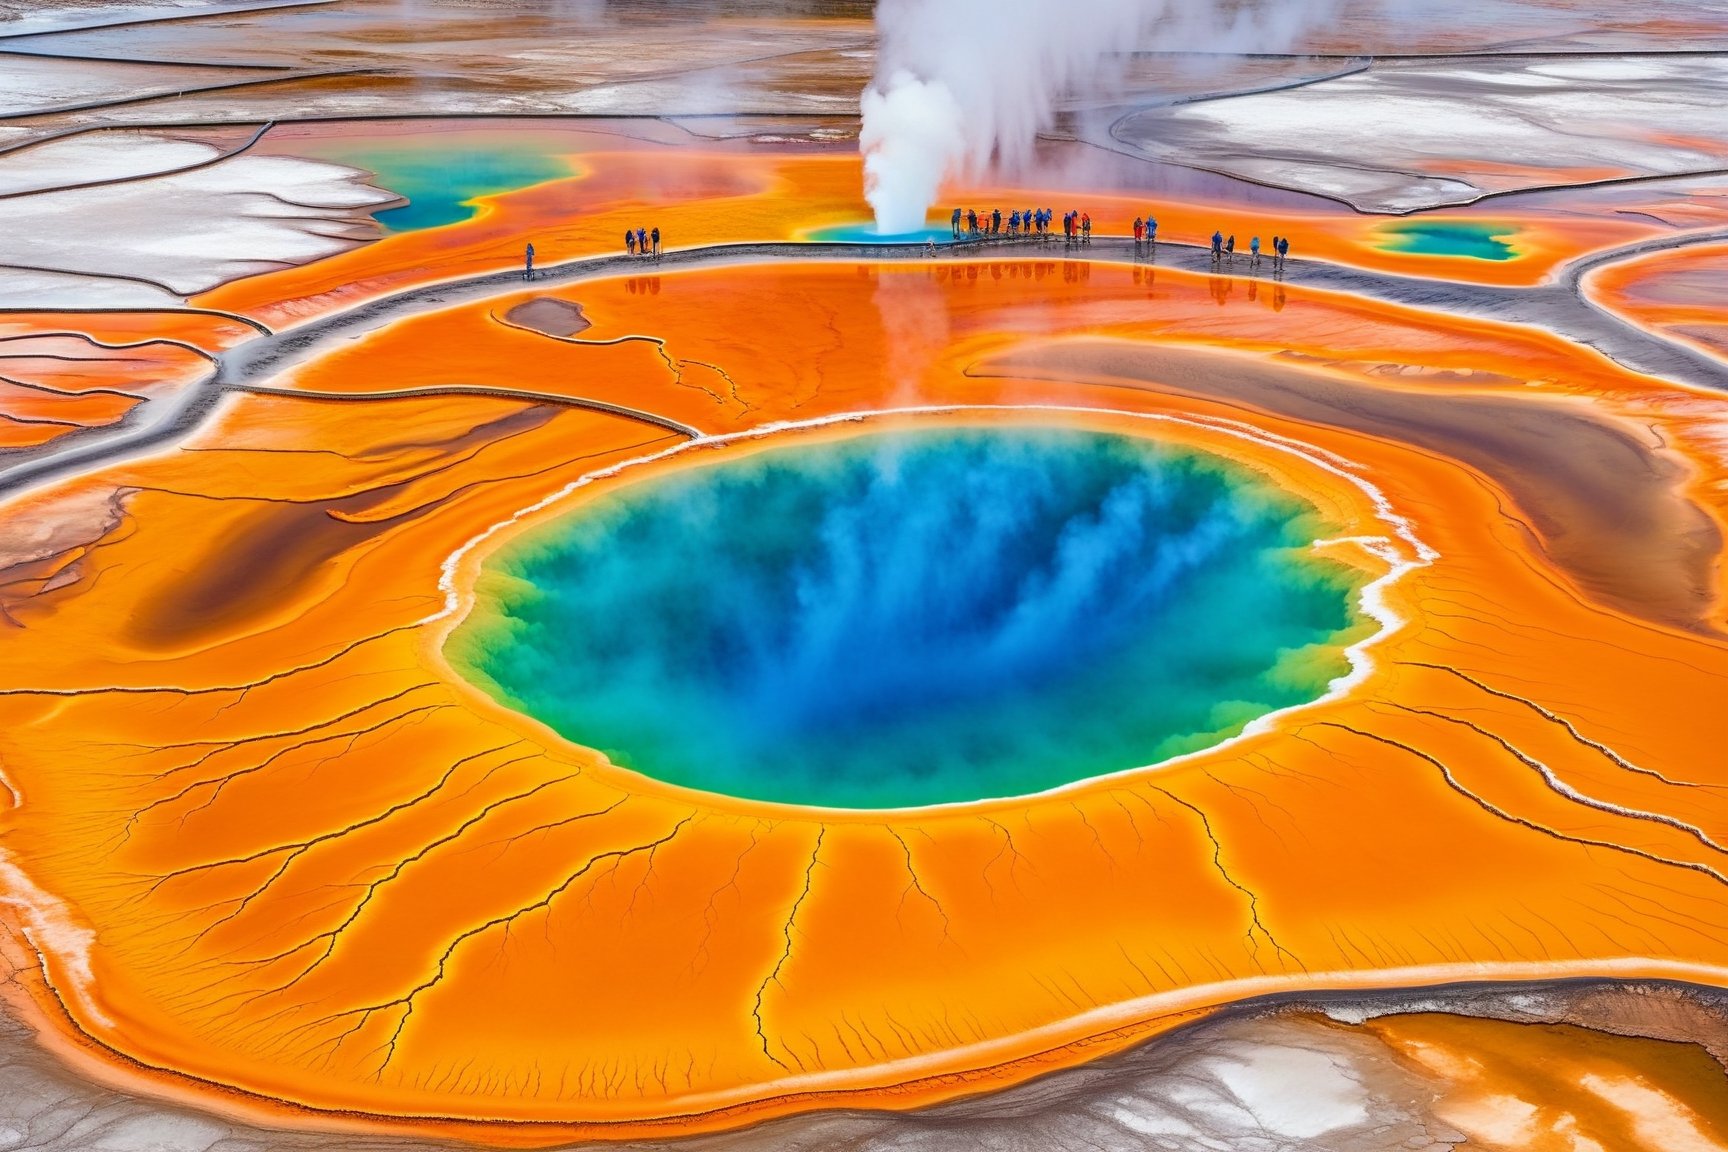 ((Hyper-Realistic)) detailed scene of one Grand Prismatic Spring in Yellowstone,diameter of 90m,vivid color for Spring,largest hot spring in United States,deep blue color in the center of the pool,aerial view,many people on road on top of the scene,orange mane-like soil around the pool,brown and white soil color,smoke from spring,brown and white color soil,1 spring
BREAK 
aesthetic,rule of thirds,depth of perspective,perfect composition,studio photo,trending on artstation,cinematic lighting,(Hyper-realistic photography,masterpiece, photorealistic,ultra-detailed,intricate details,16K,sharp focus,high contrast,kodachrome 800,HDR:1.2),photo_b00ster,real_booster,ye11owst0ne,(grandpr1smat1c:1.2),grandpr1smat1c